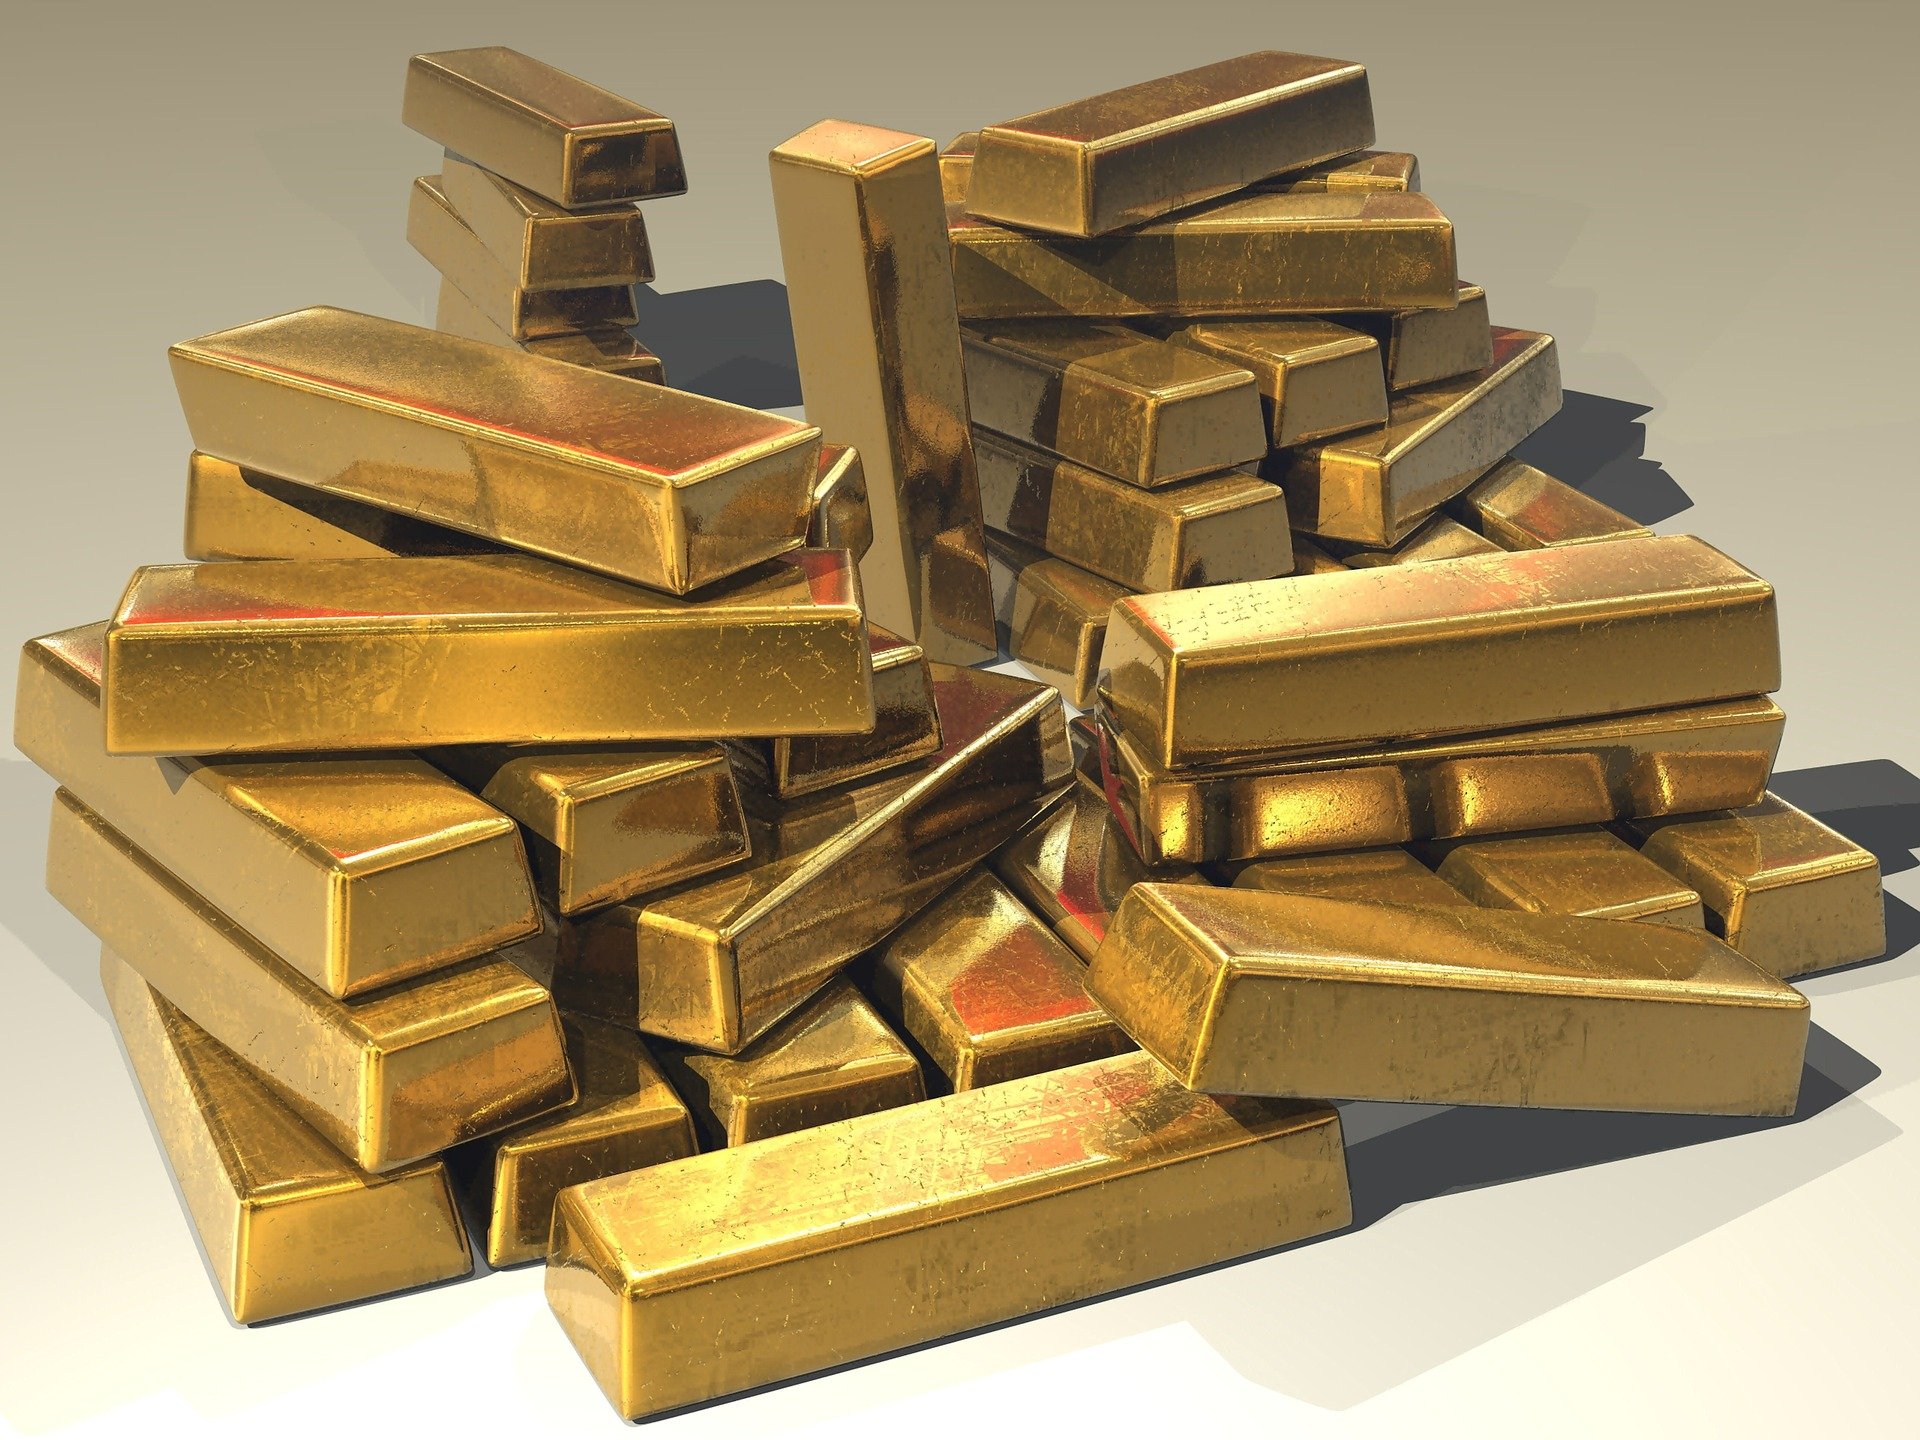 The thief had hopes that they would find a big pile of gold! | Photo: Pixabay/Steve Bidmead